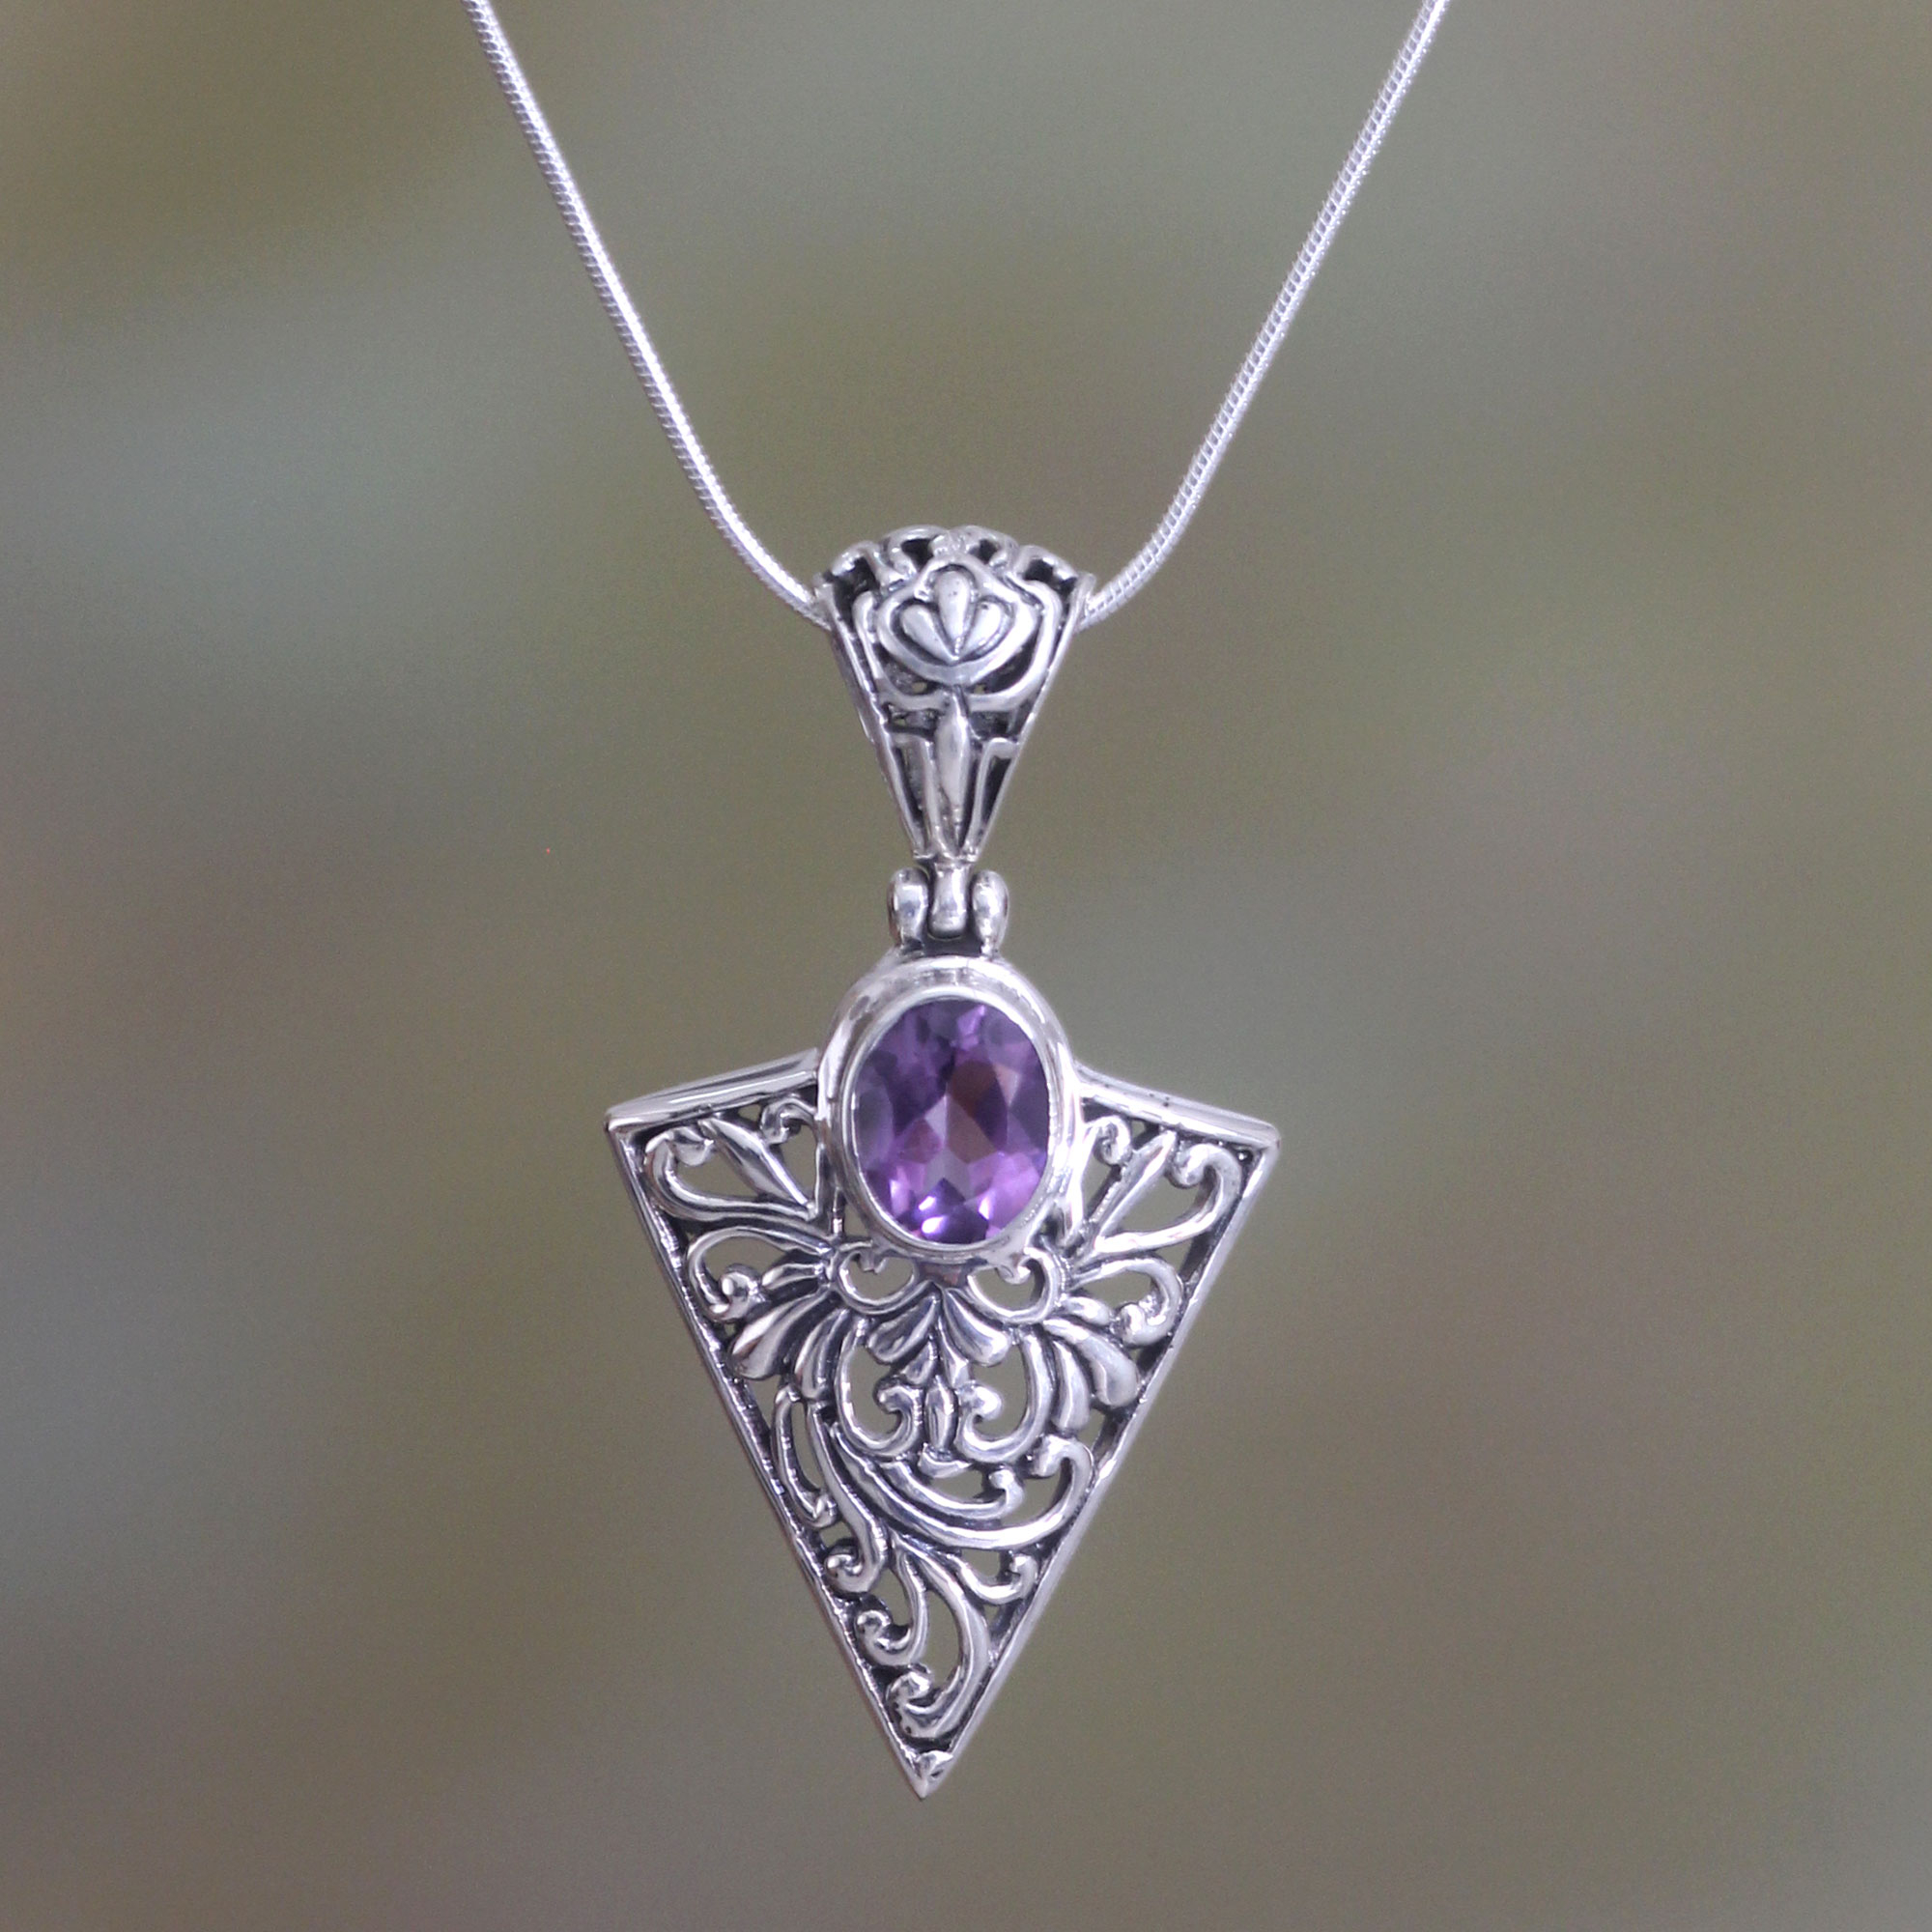 Amethyst and Sterling Silver Pendant Necklace - Love's Arrow | NOVICA